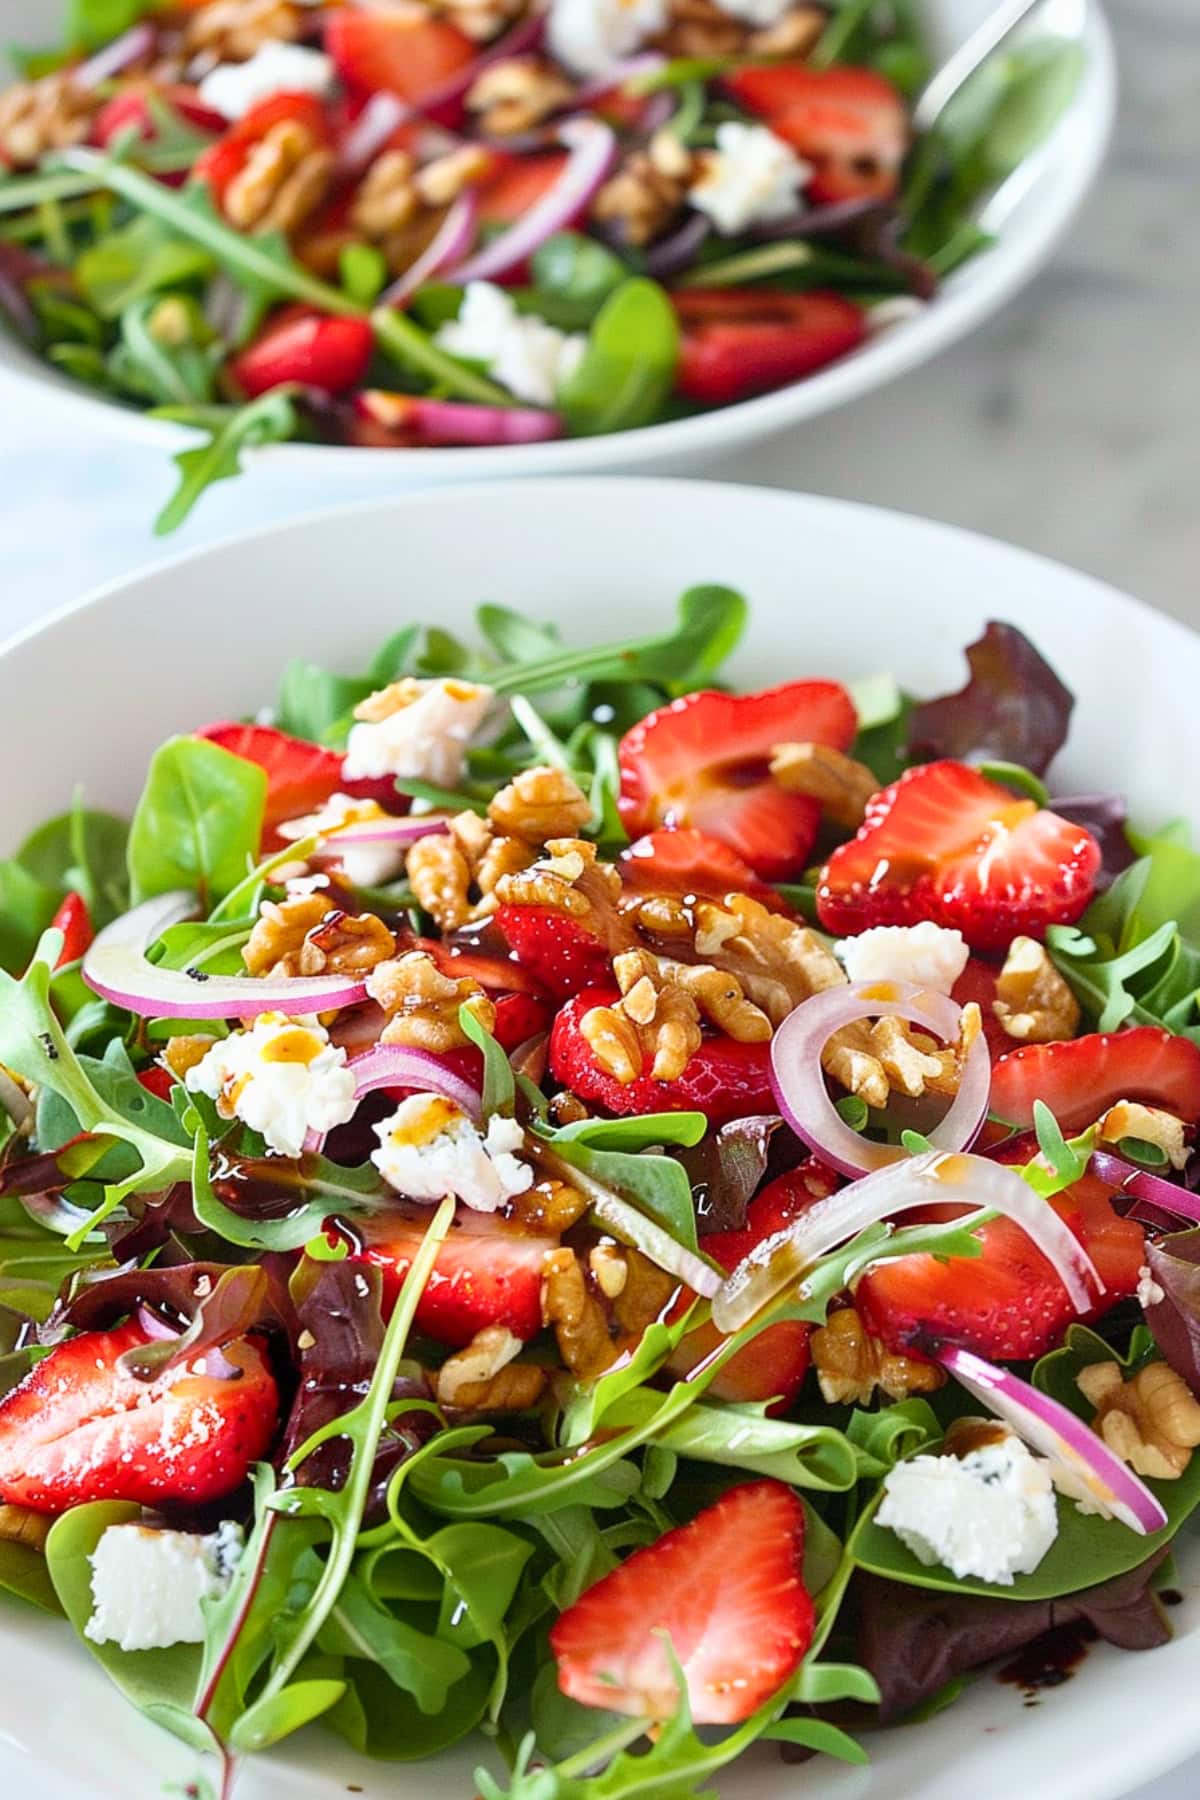 Sliced strawberries with mixed baby greens, chopped walnuts, red onions and balsamic vinaigrette served on a white plate.